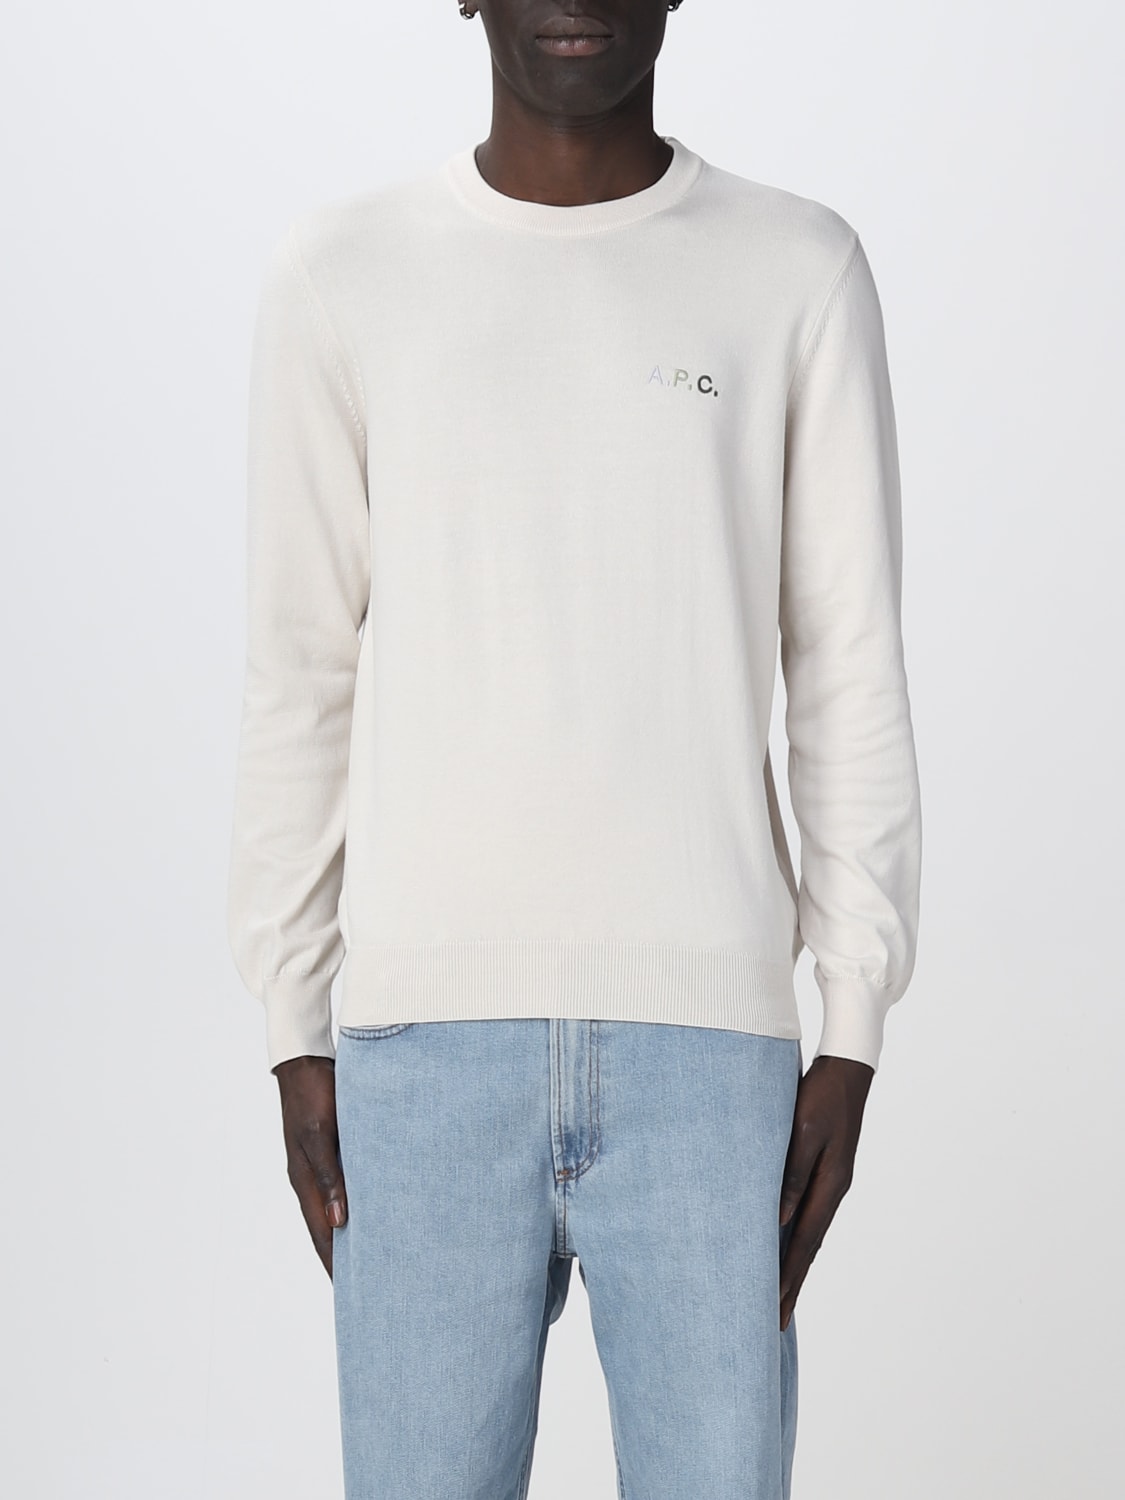 A.p.c. Outlet: sweater for man - White | A.p.c. sweater COGDHH23164 ...